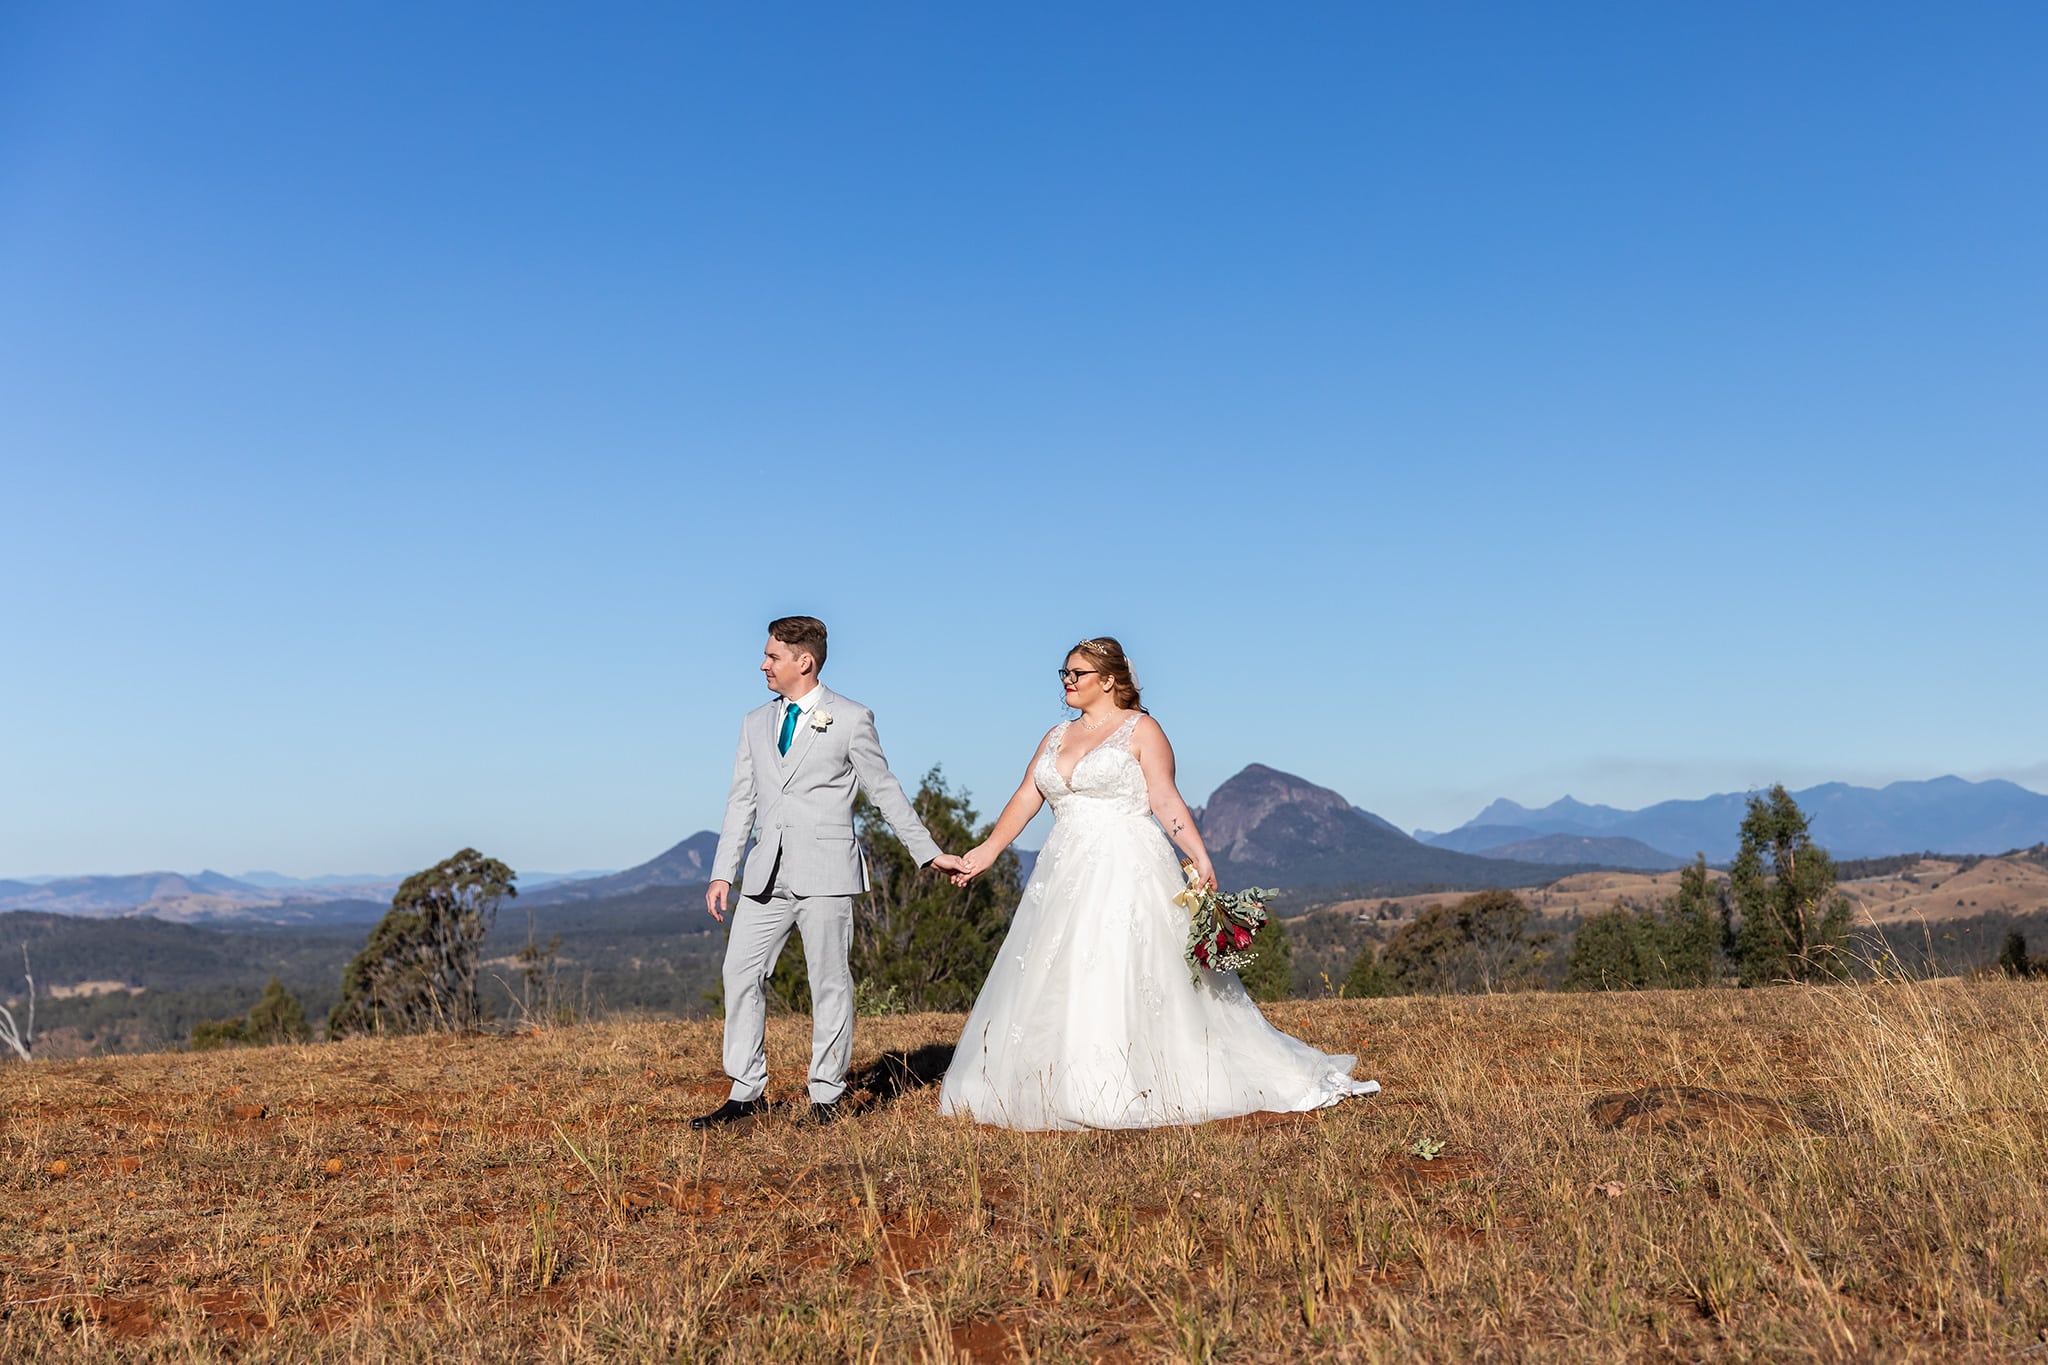 Bridal party at Laurenvale Estate in Aratula, Scenic Rim, by Mooi Photography.